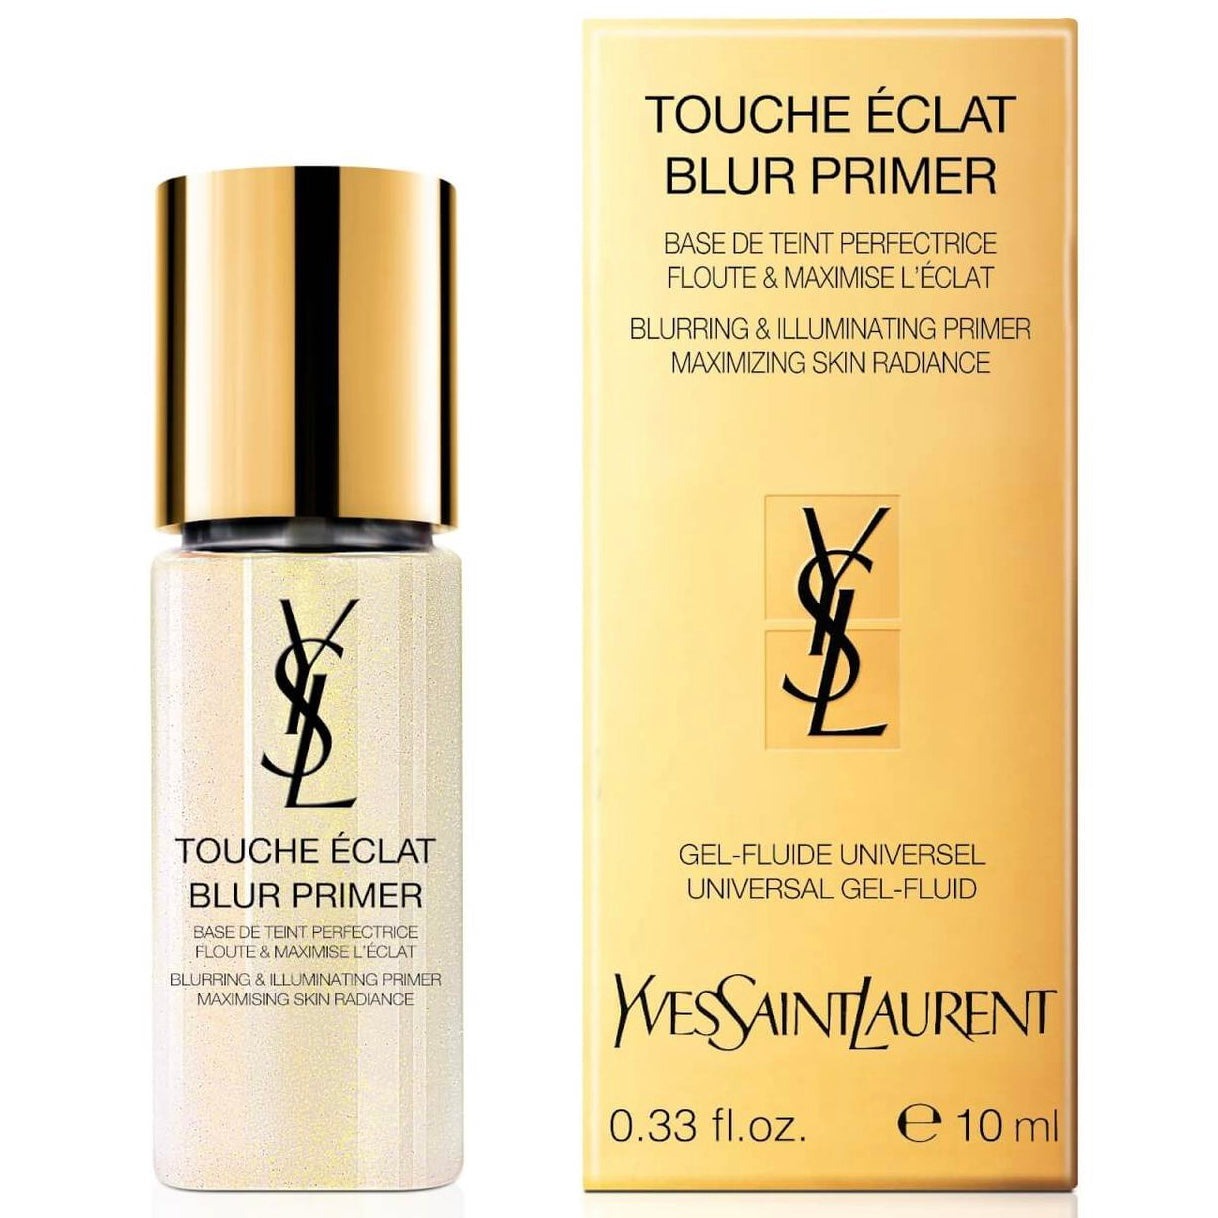 YSL Touche Éclat Blur Primer bottle and packaging.